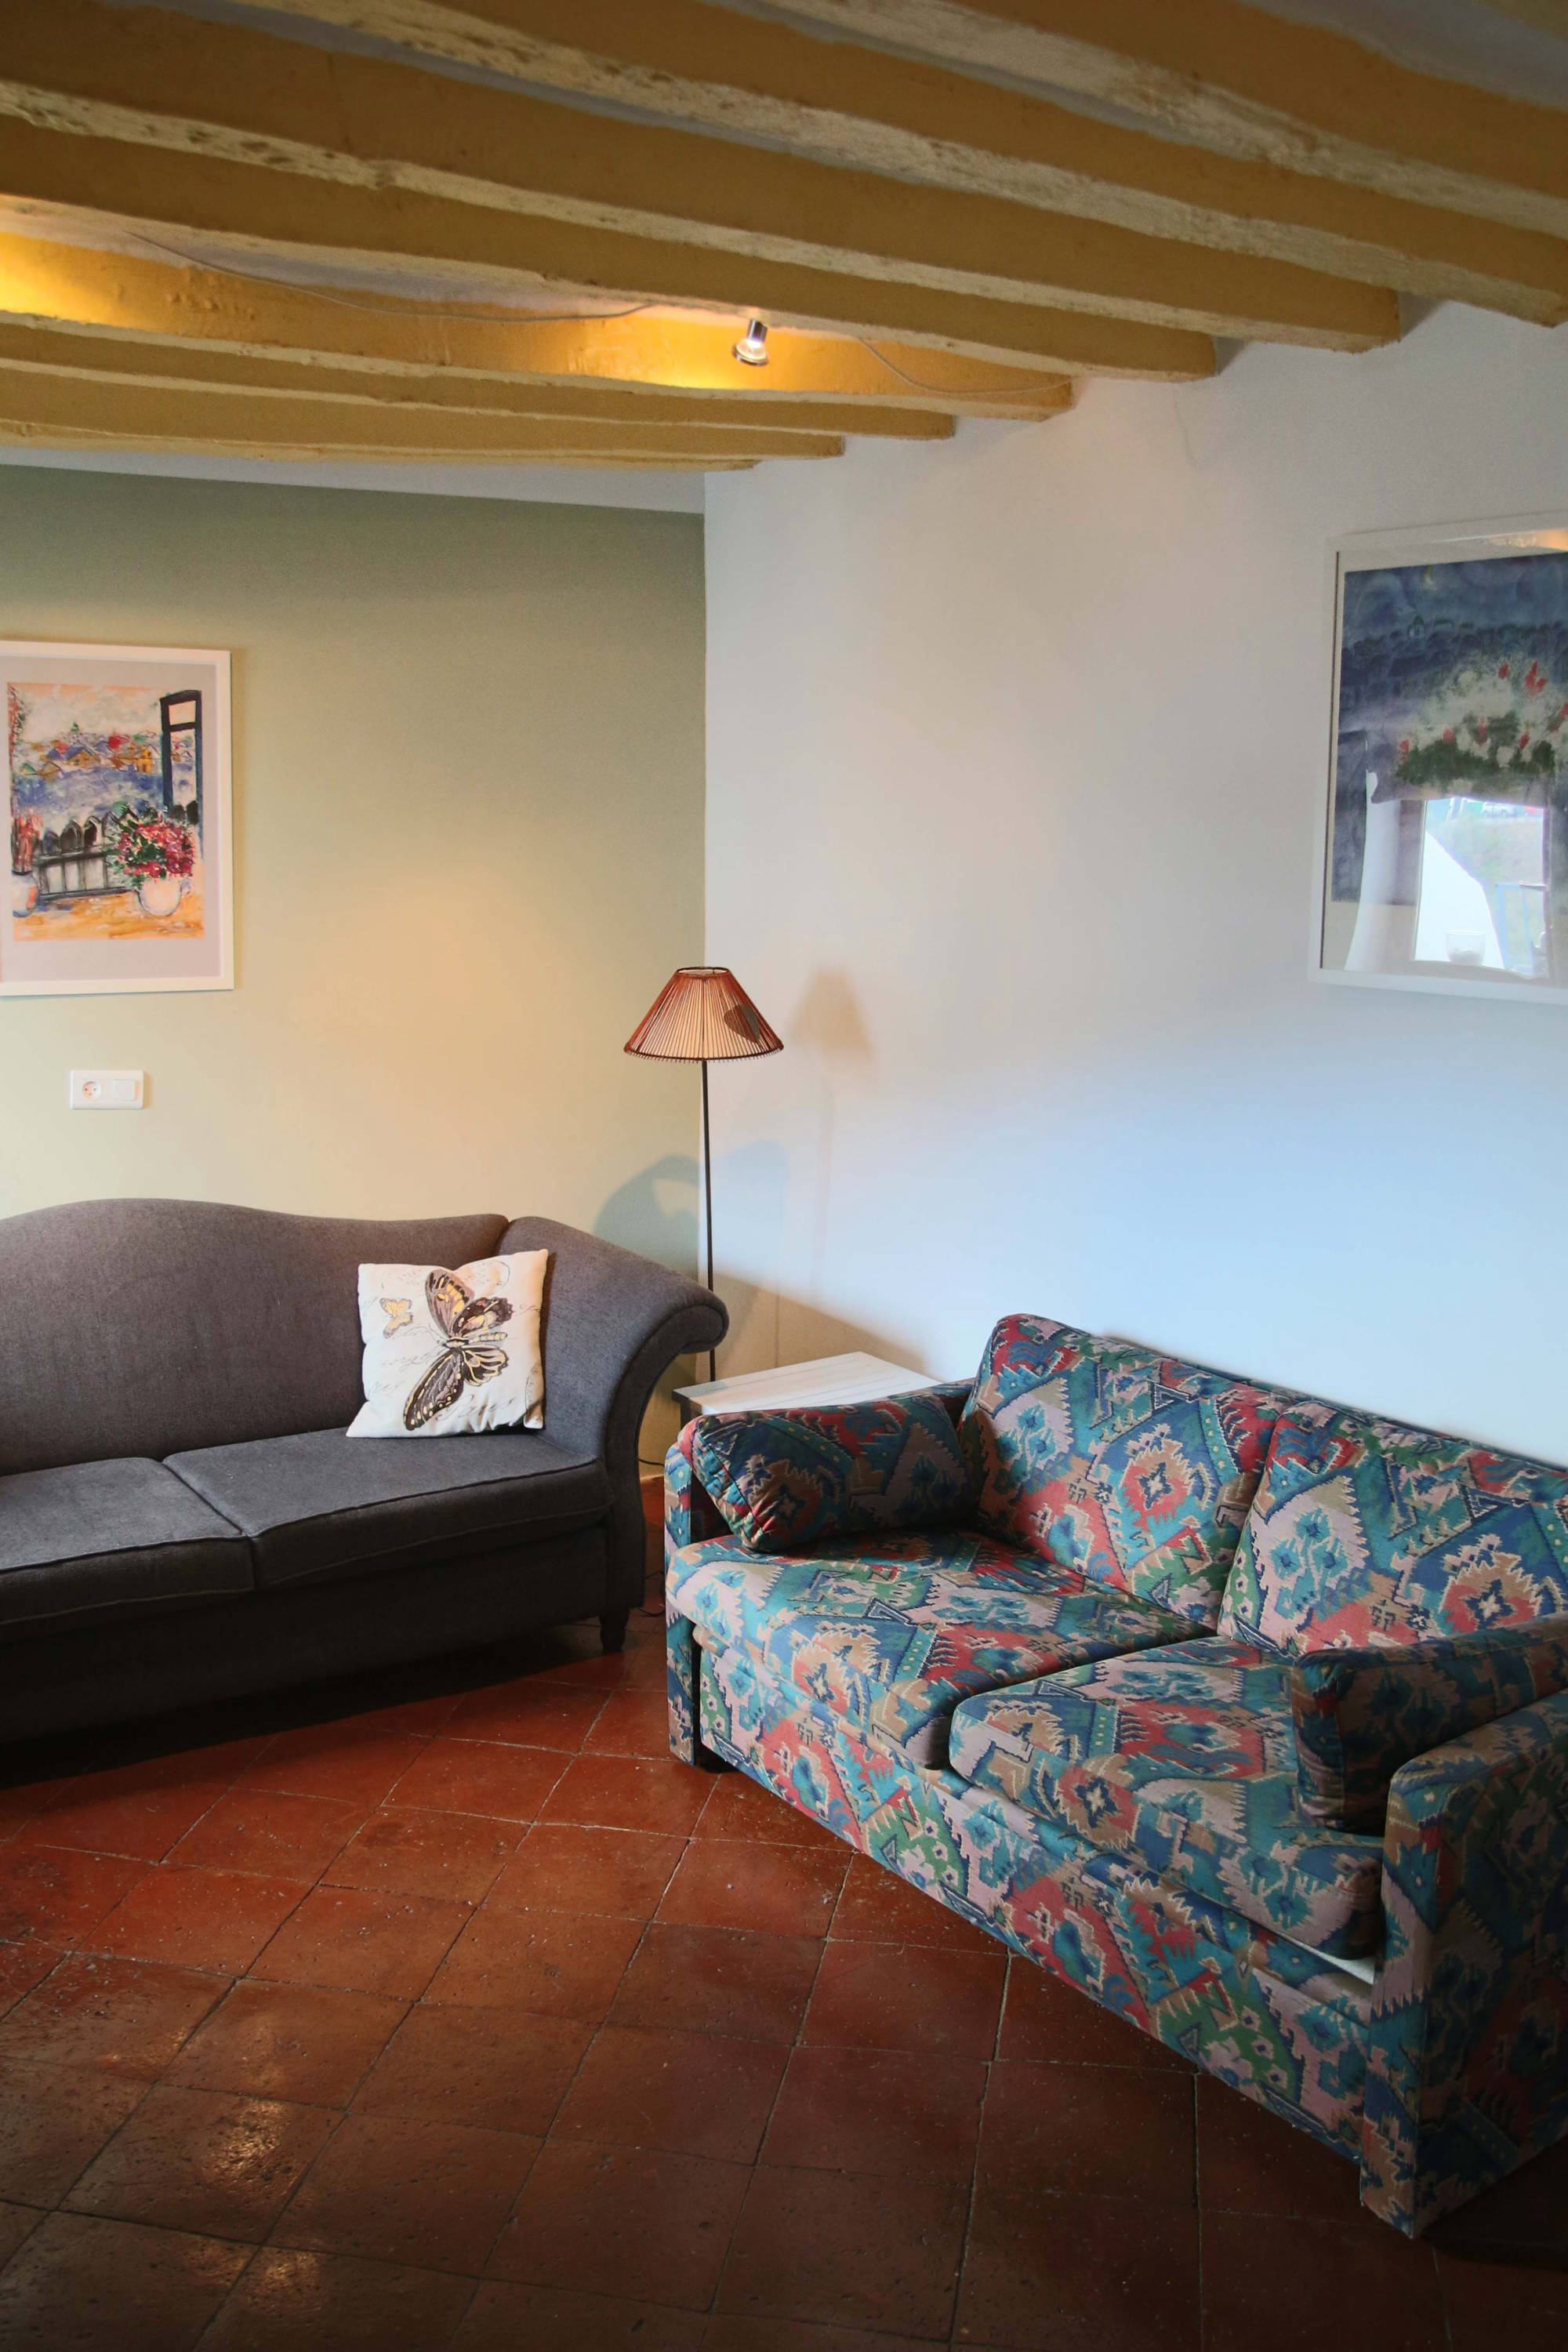 Malaga, Picasso, Nerja cuves, Alhambra palais visit from our place in Competa